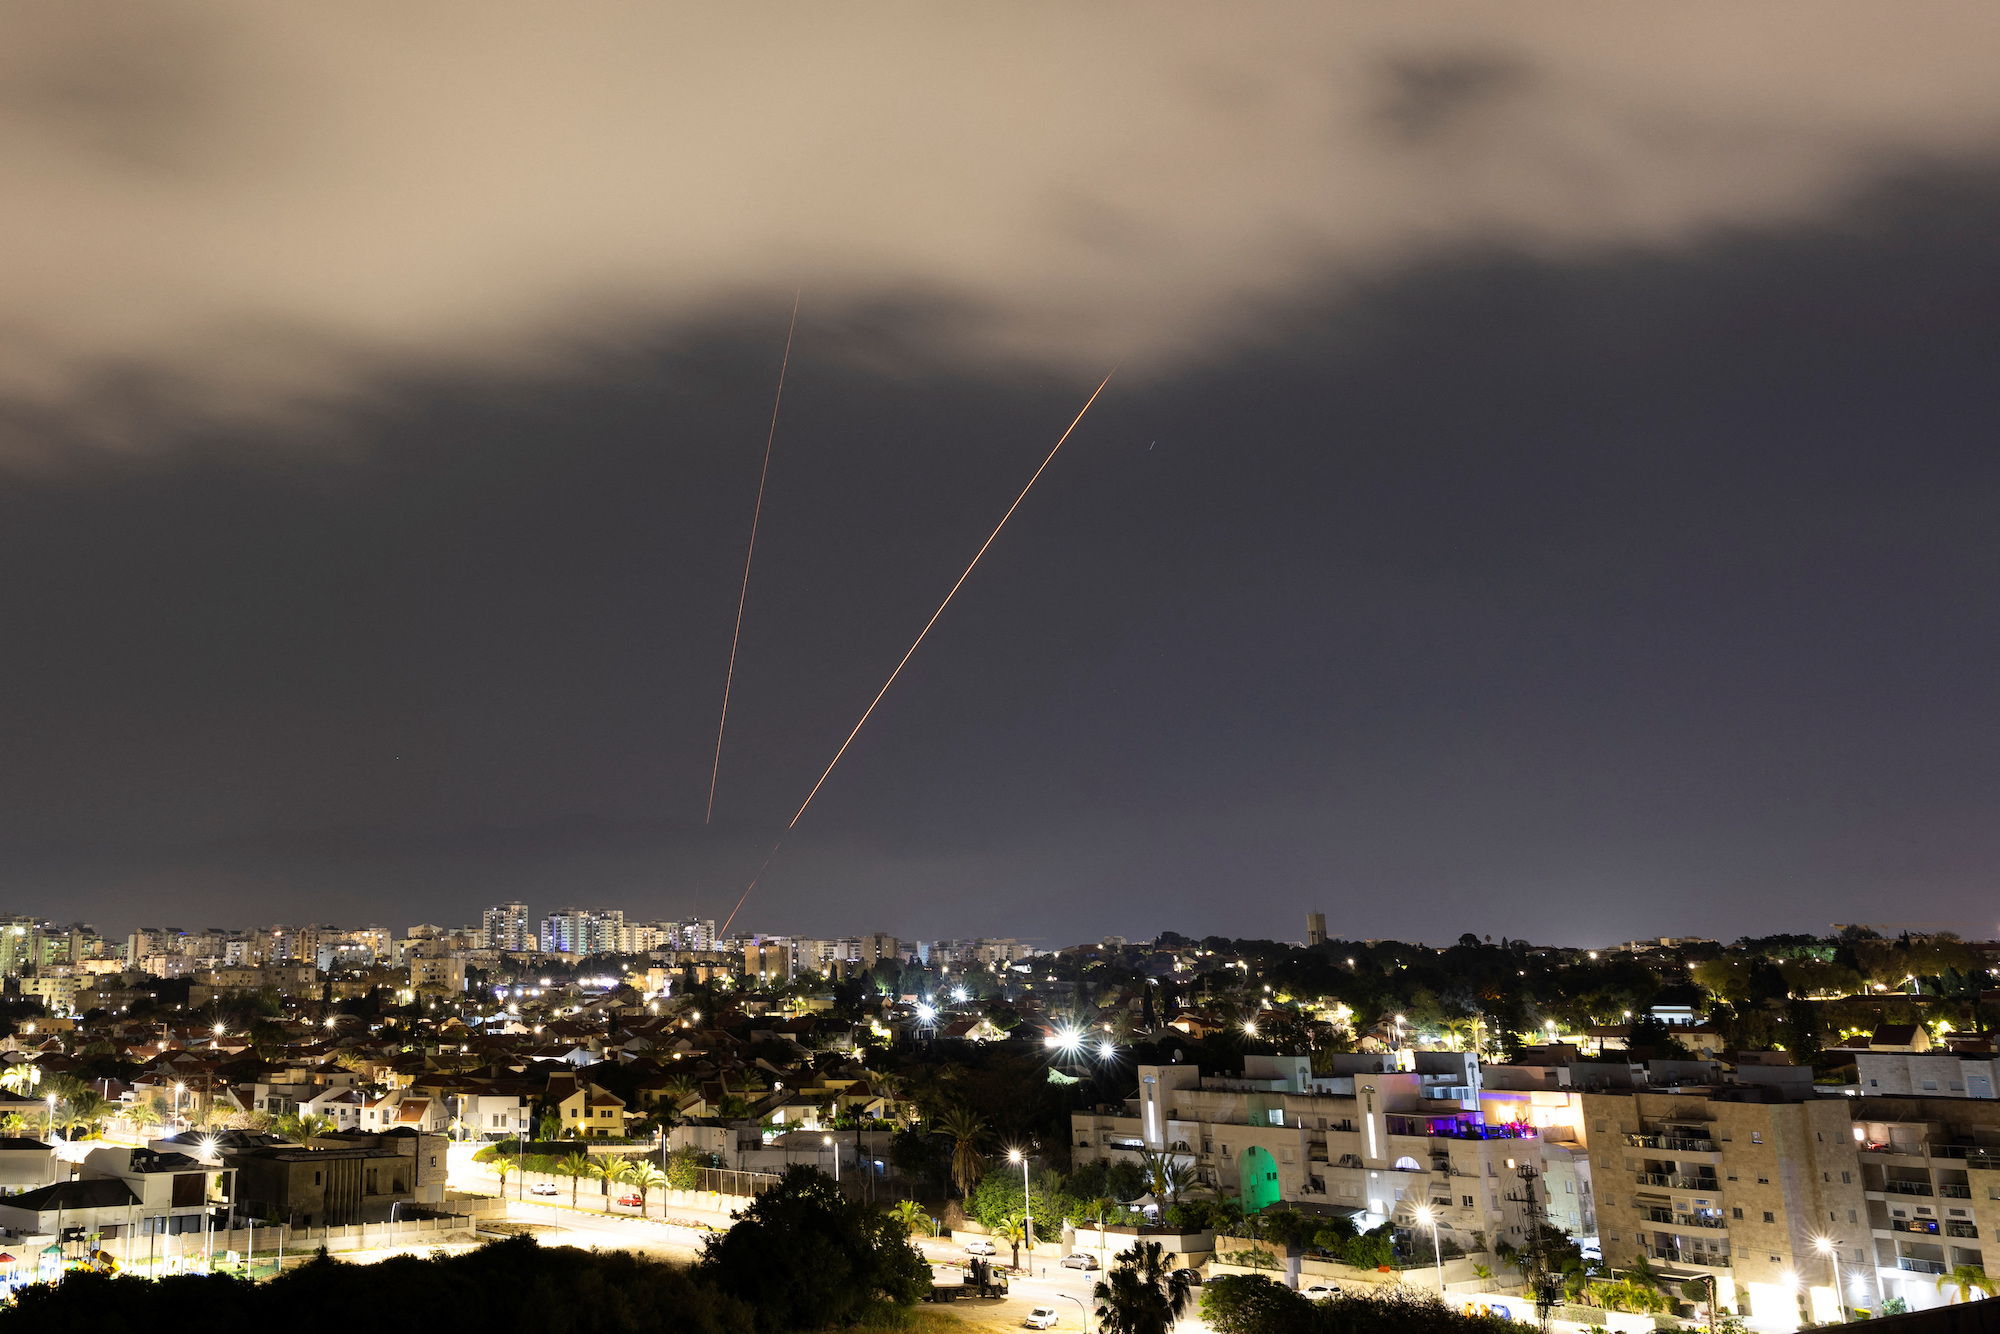 An anti-missile system operates as seen from Ashkelon, Israel, on Saturday.